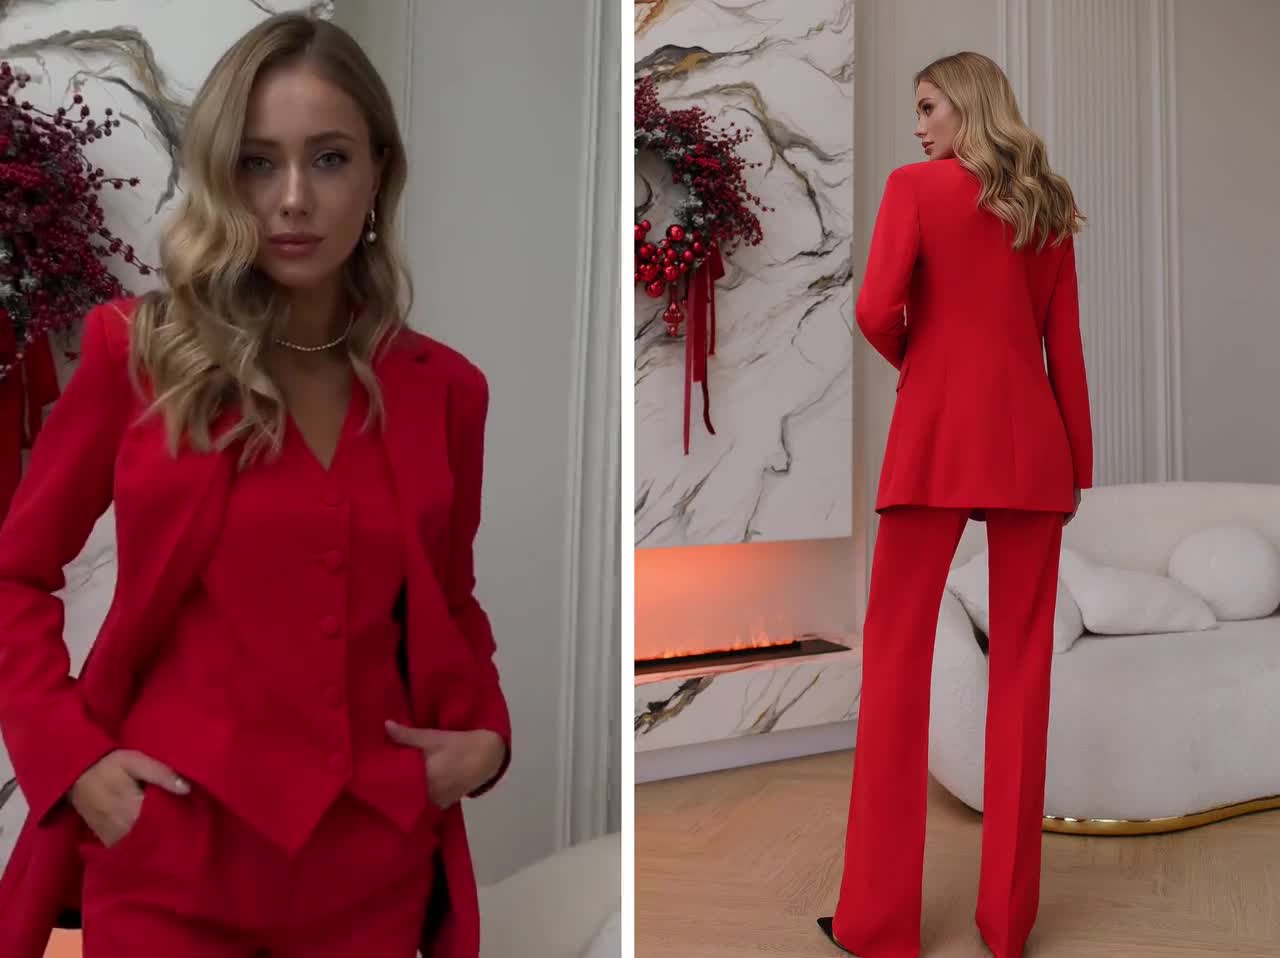 Hot Red Stunning Classic 3-piece Pantsuit. Red Three Piece Women's Suit.  3-piece Set Jacket Vest and Trousers. Office Matching Set. 